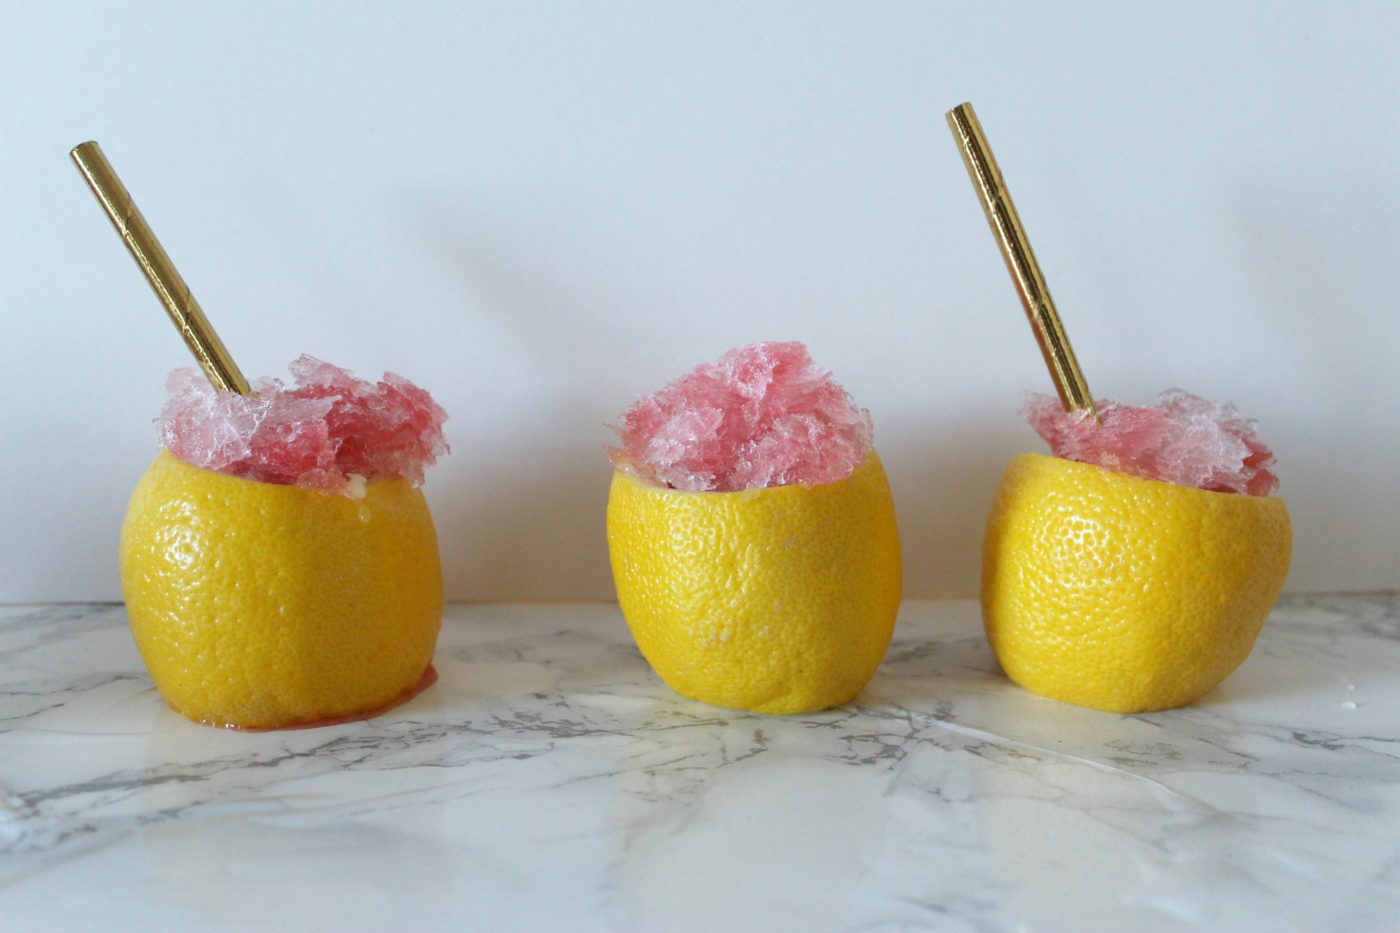 Lemonade is already a refreshing beverage. When you add vodka and cute lemon cups, it's even better.